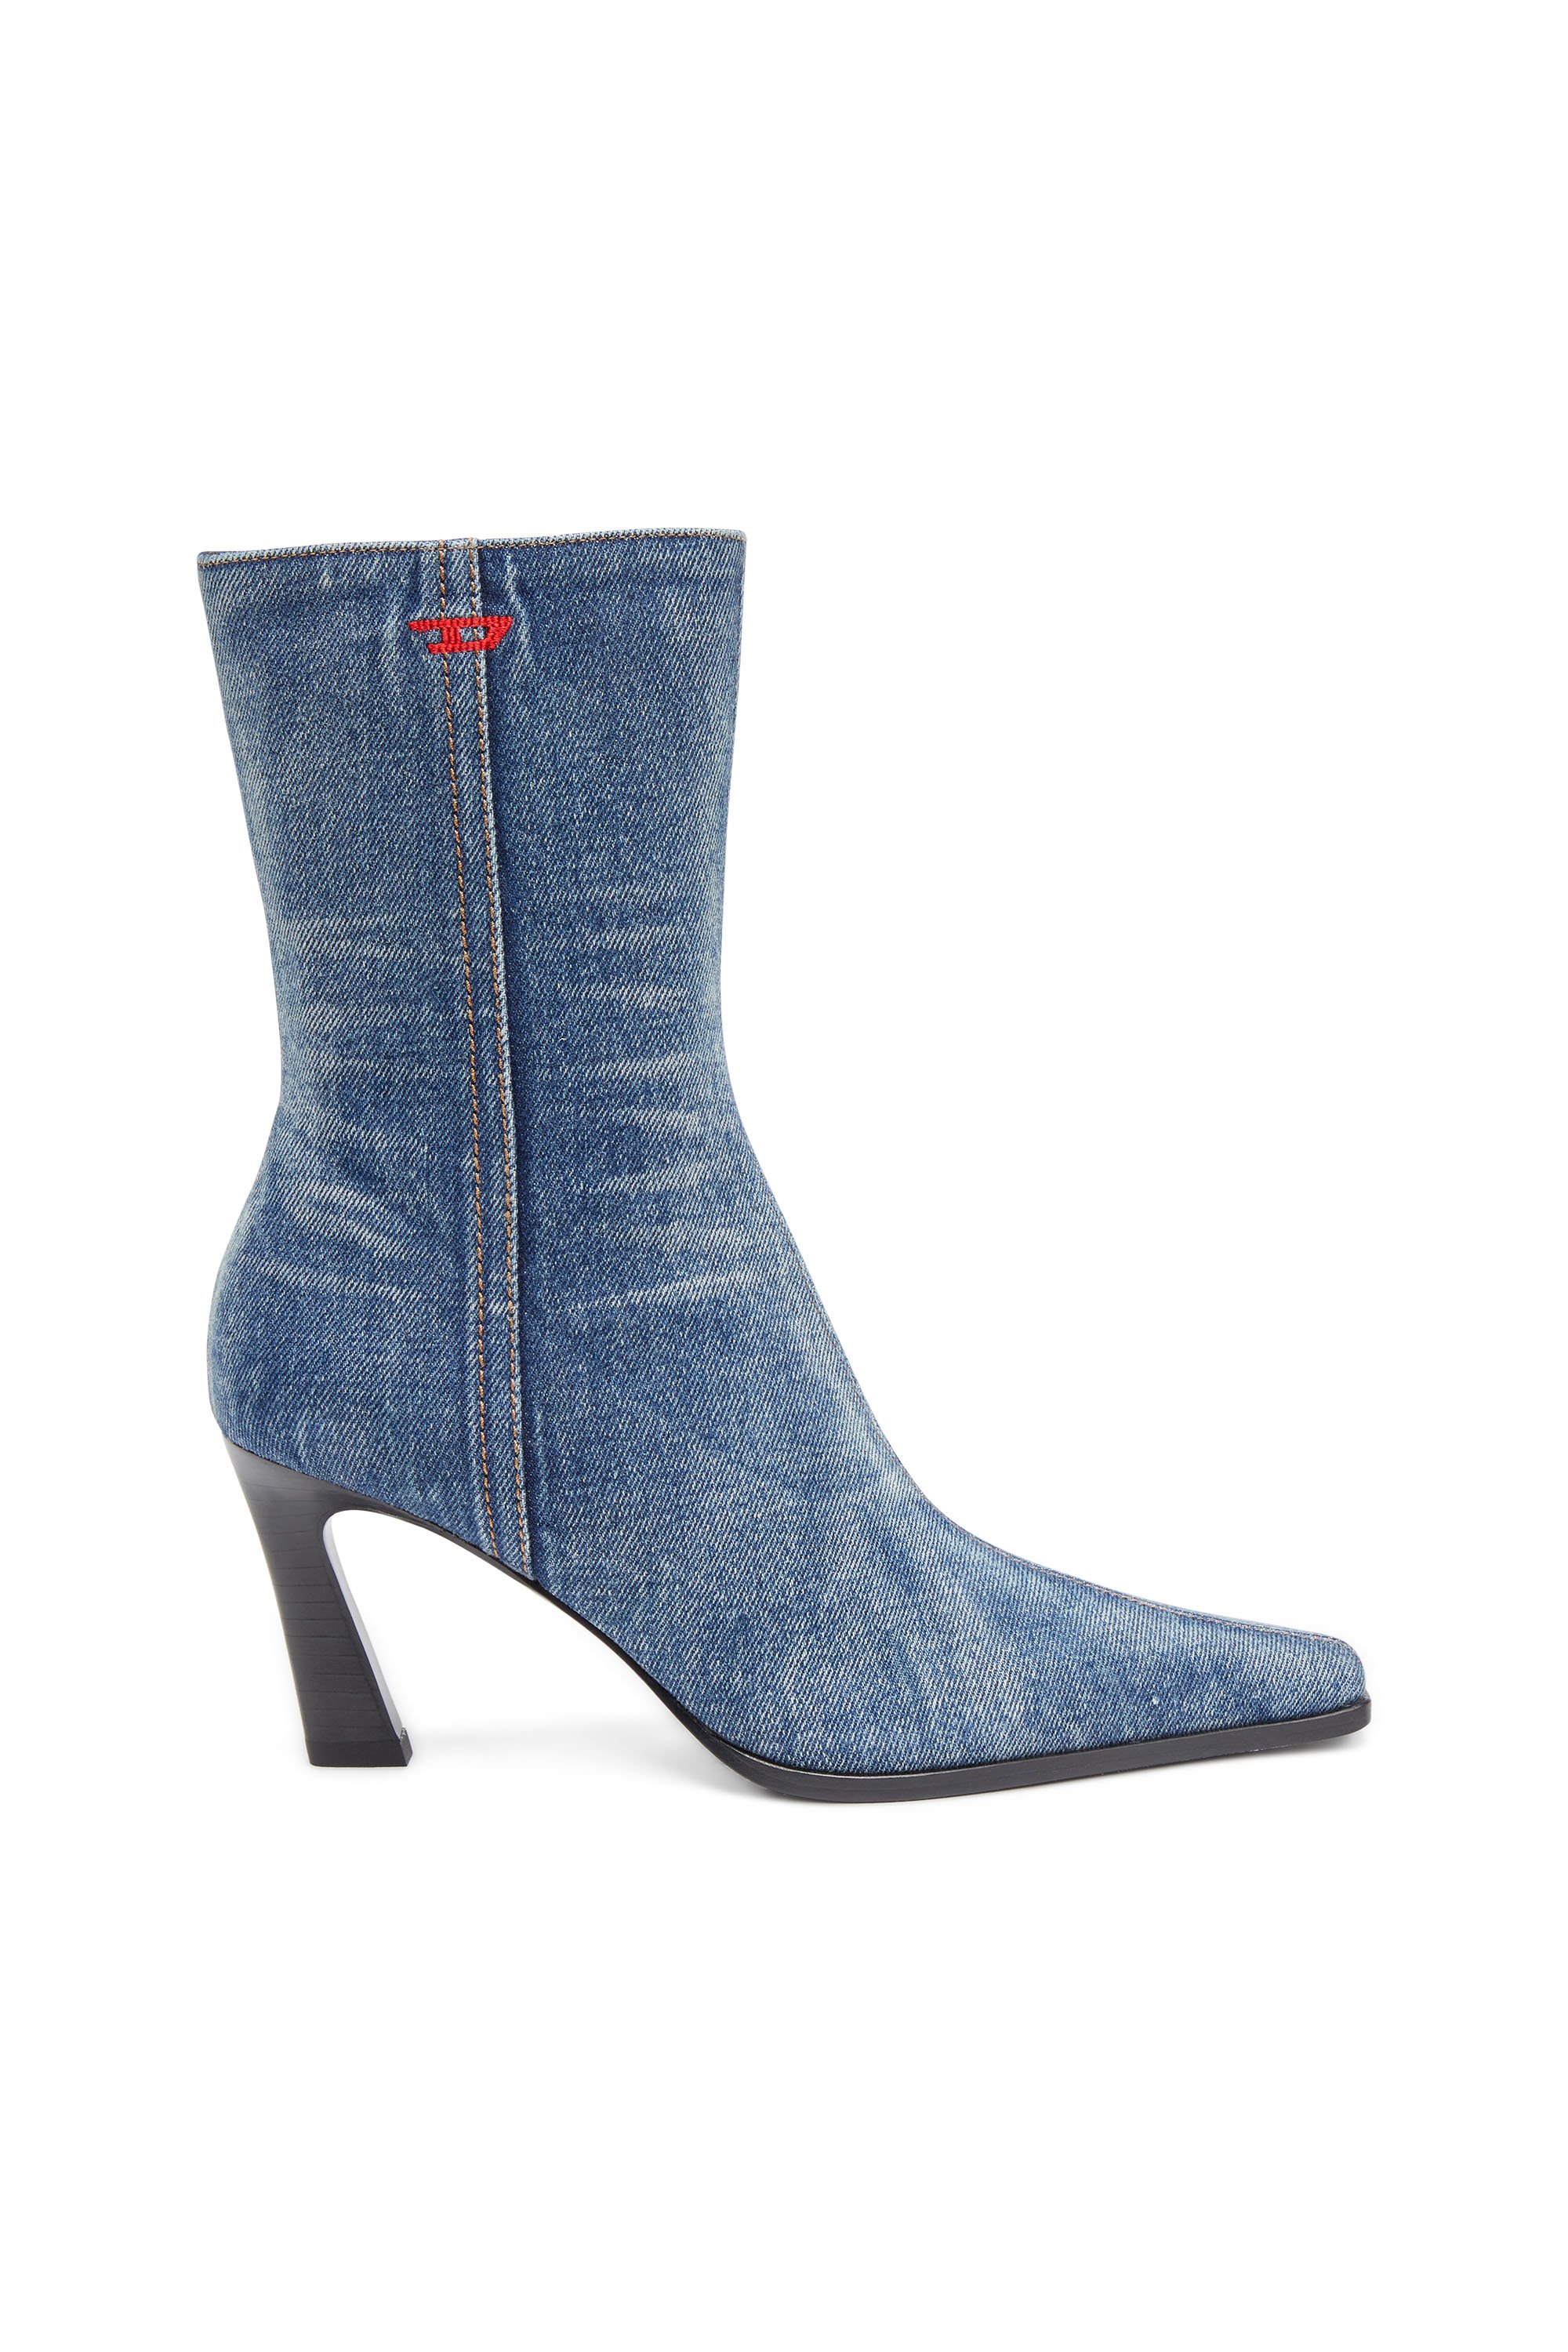 Diesel - D-Allas Bt - Ankle boot in washed denim - Boots - Woman - Blue